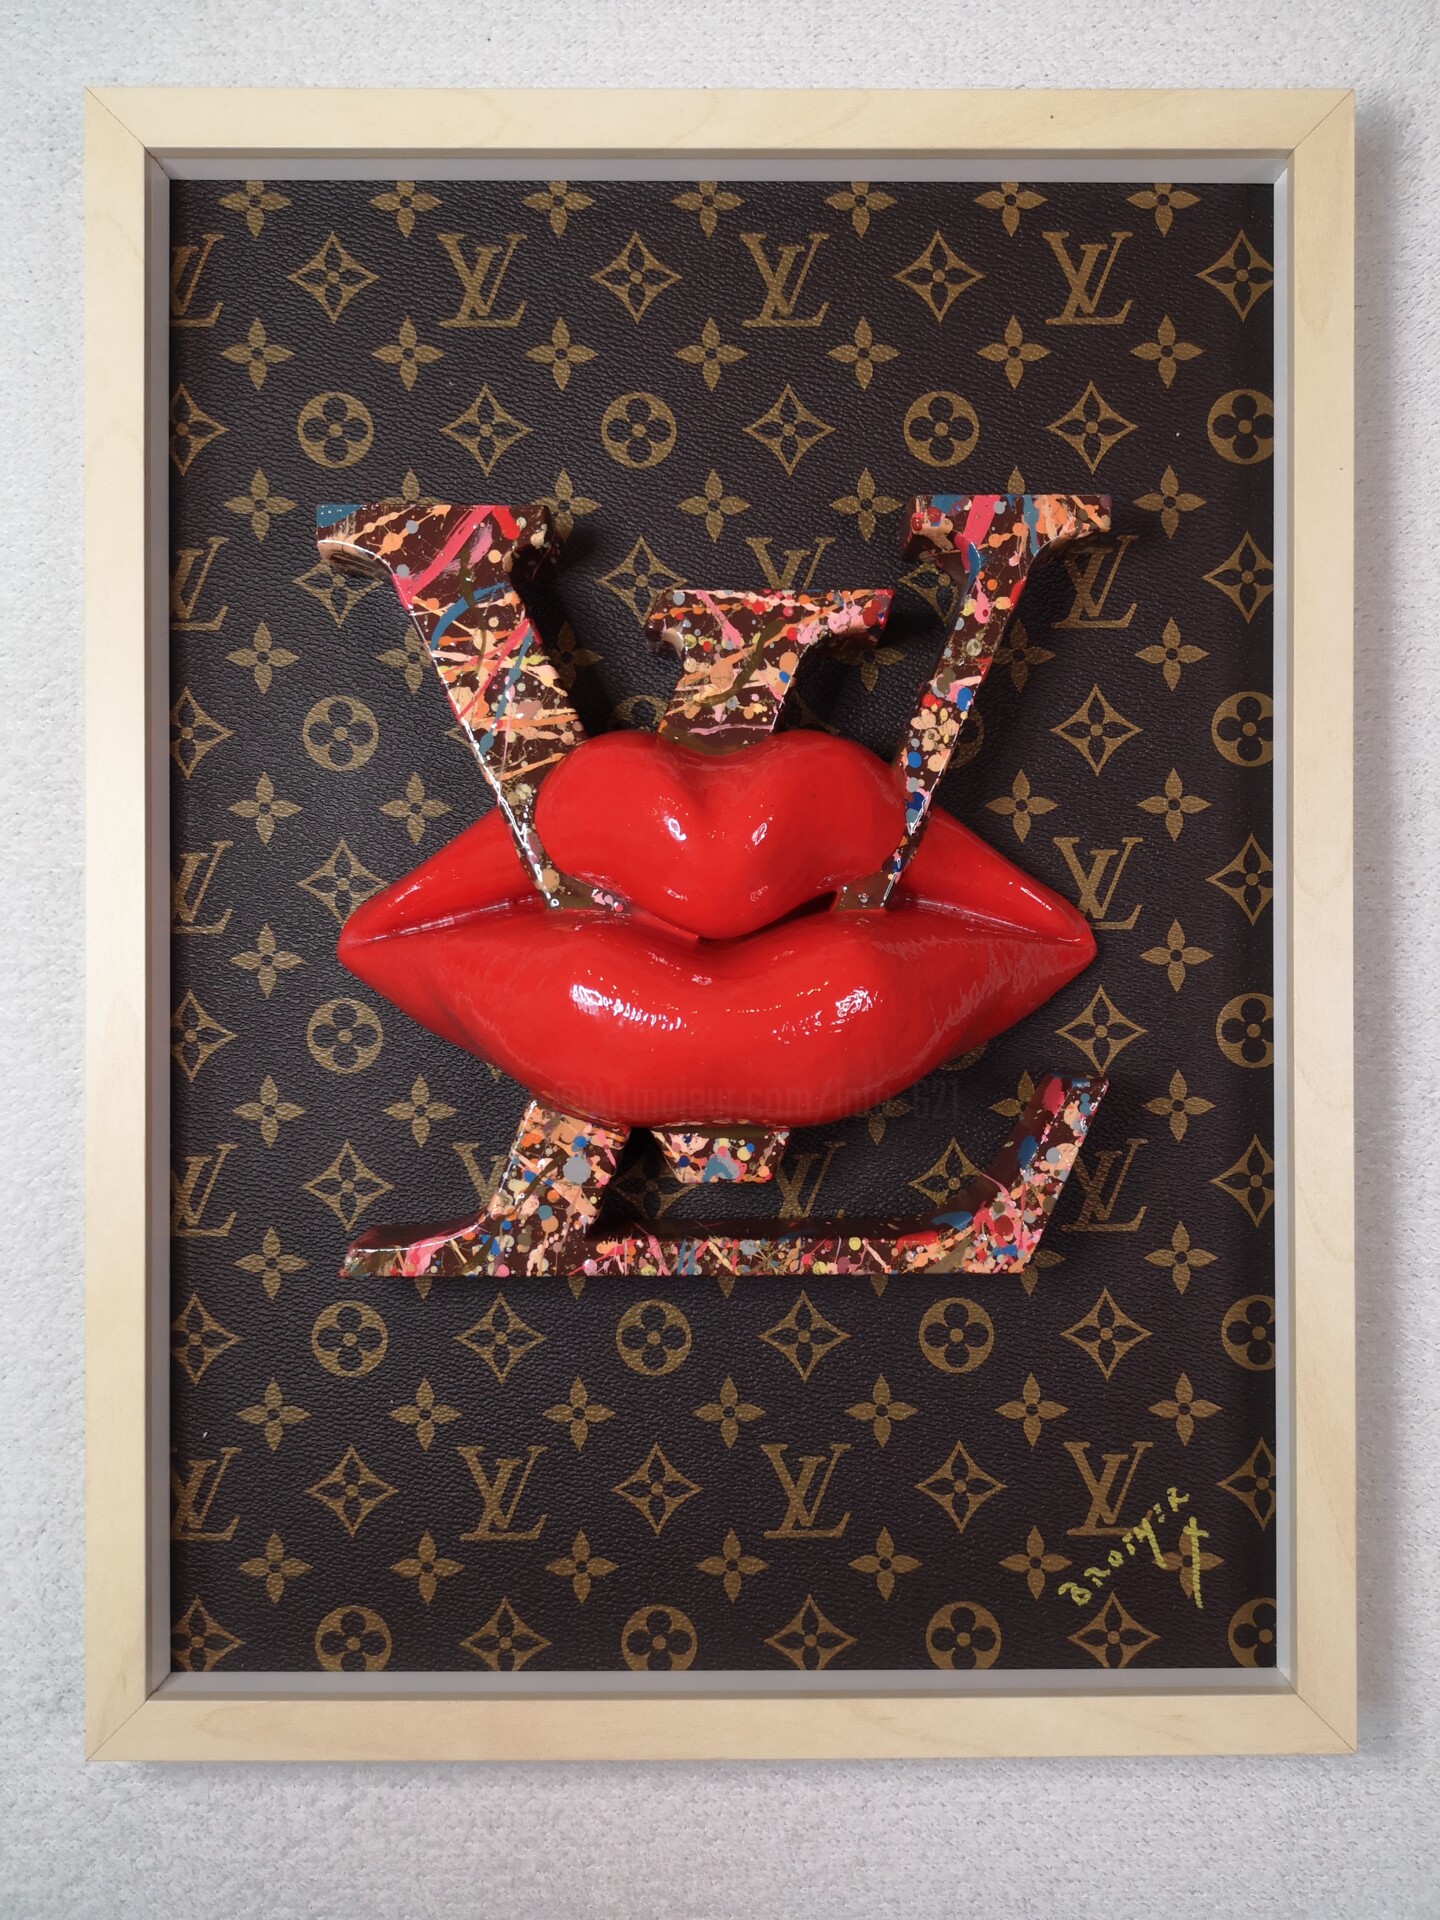 Playboy By Louis Vuitton, Sculpture by Brother X